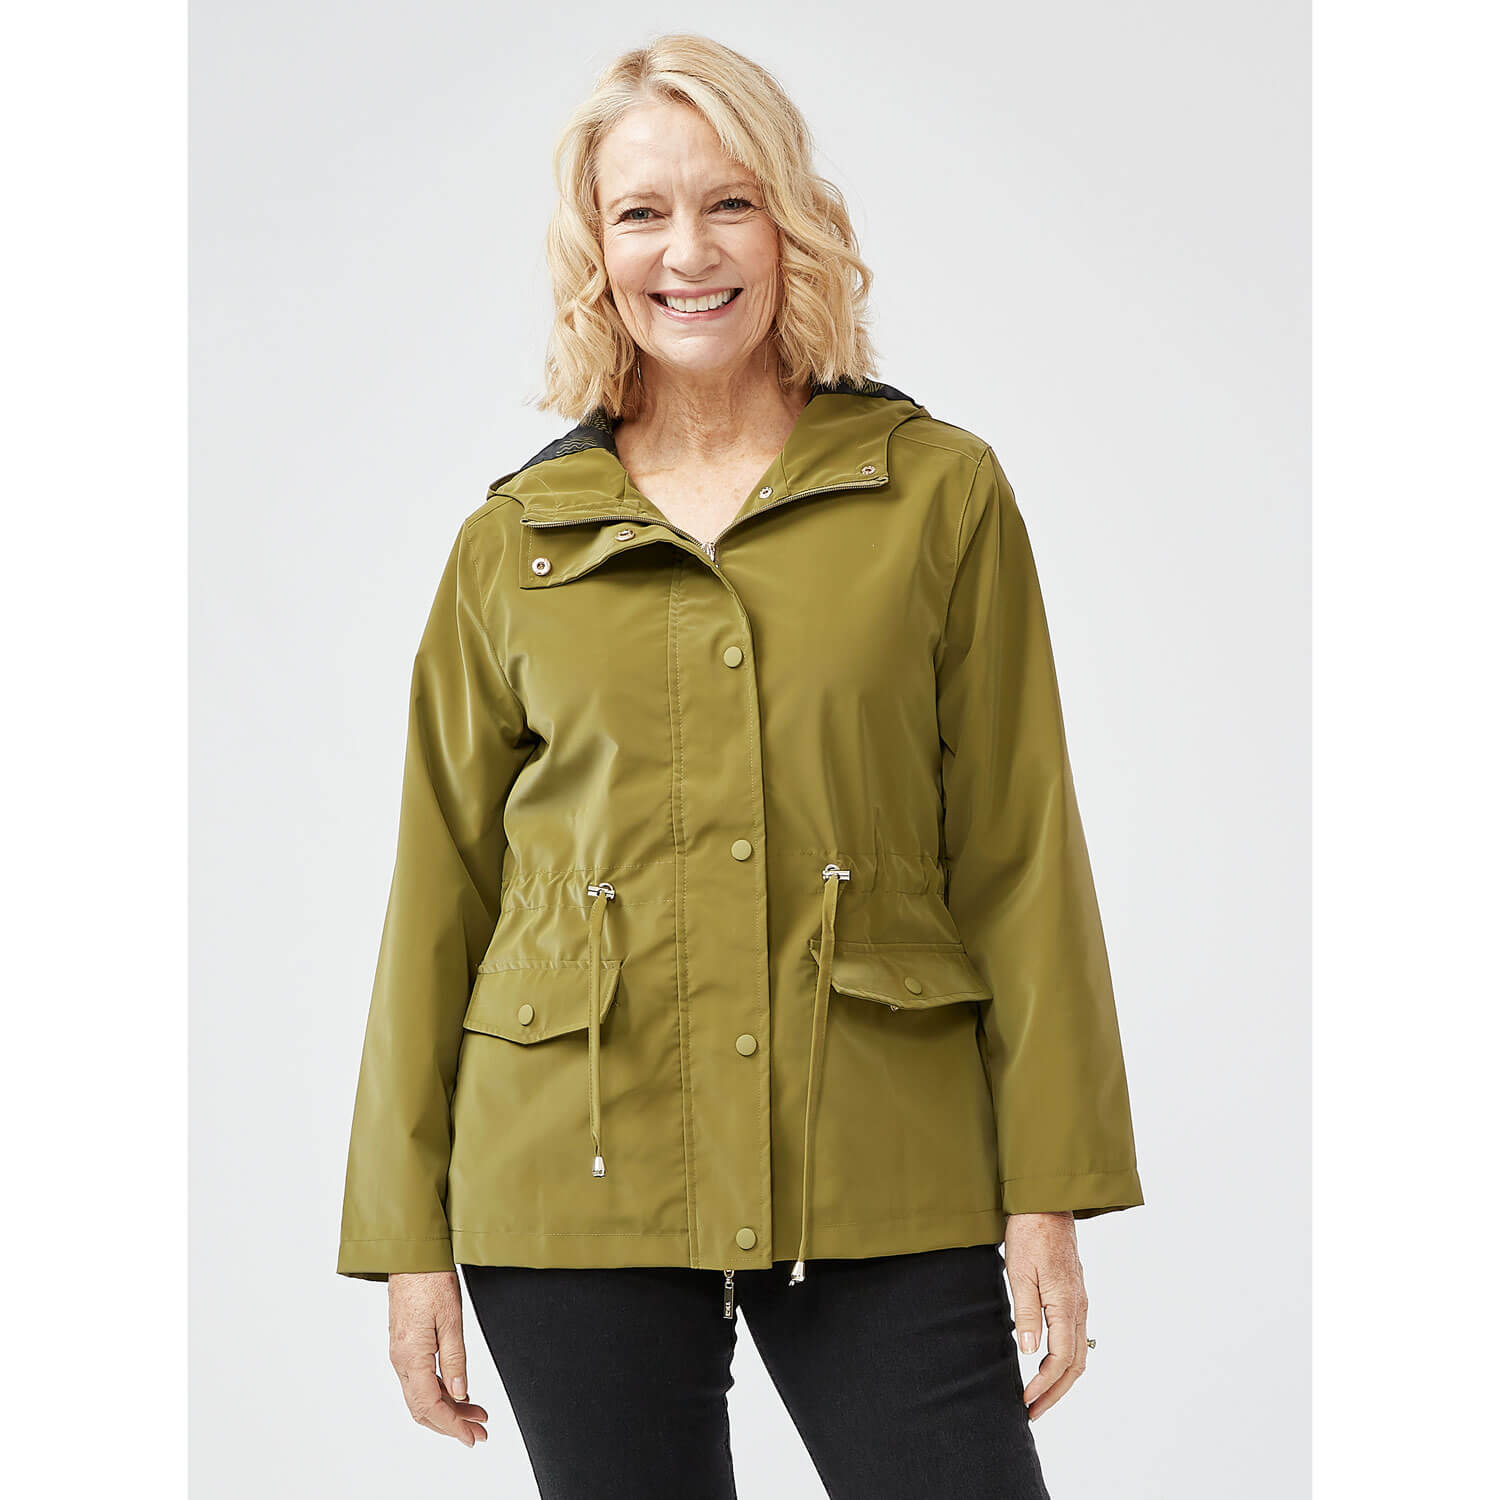 Tigiwear Moss Hooded Spring Coat 1 Shaws Department Stores